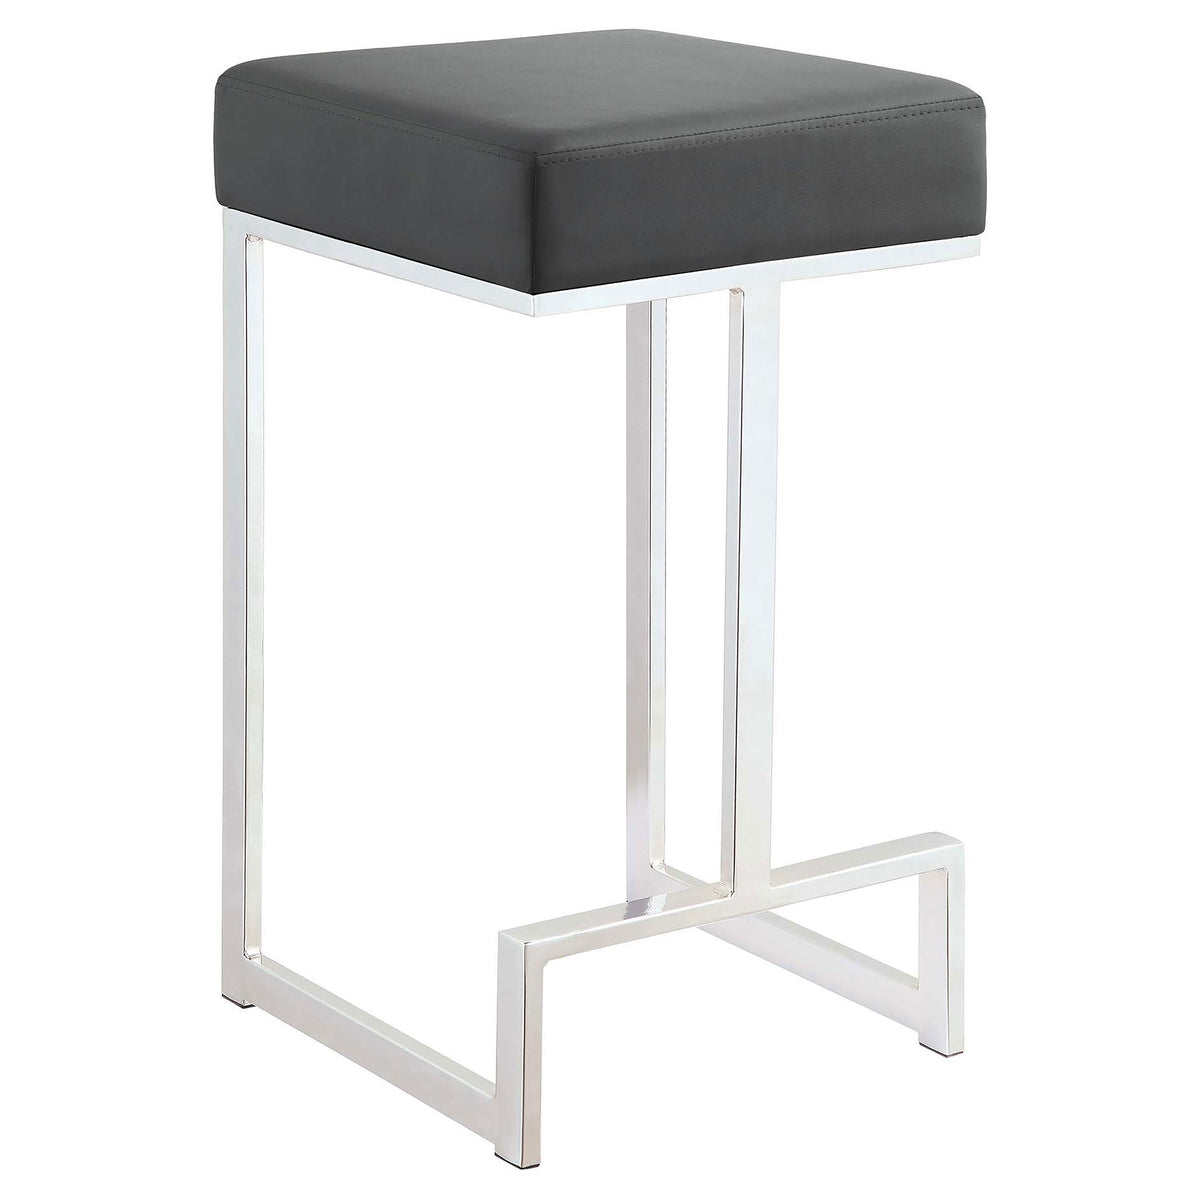 Gervase Square Counter Height Stool Grey and Chrome  Half Price Furniture